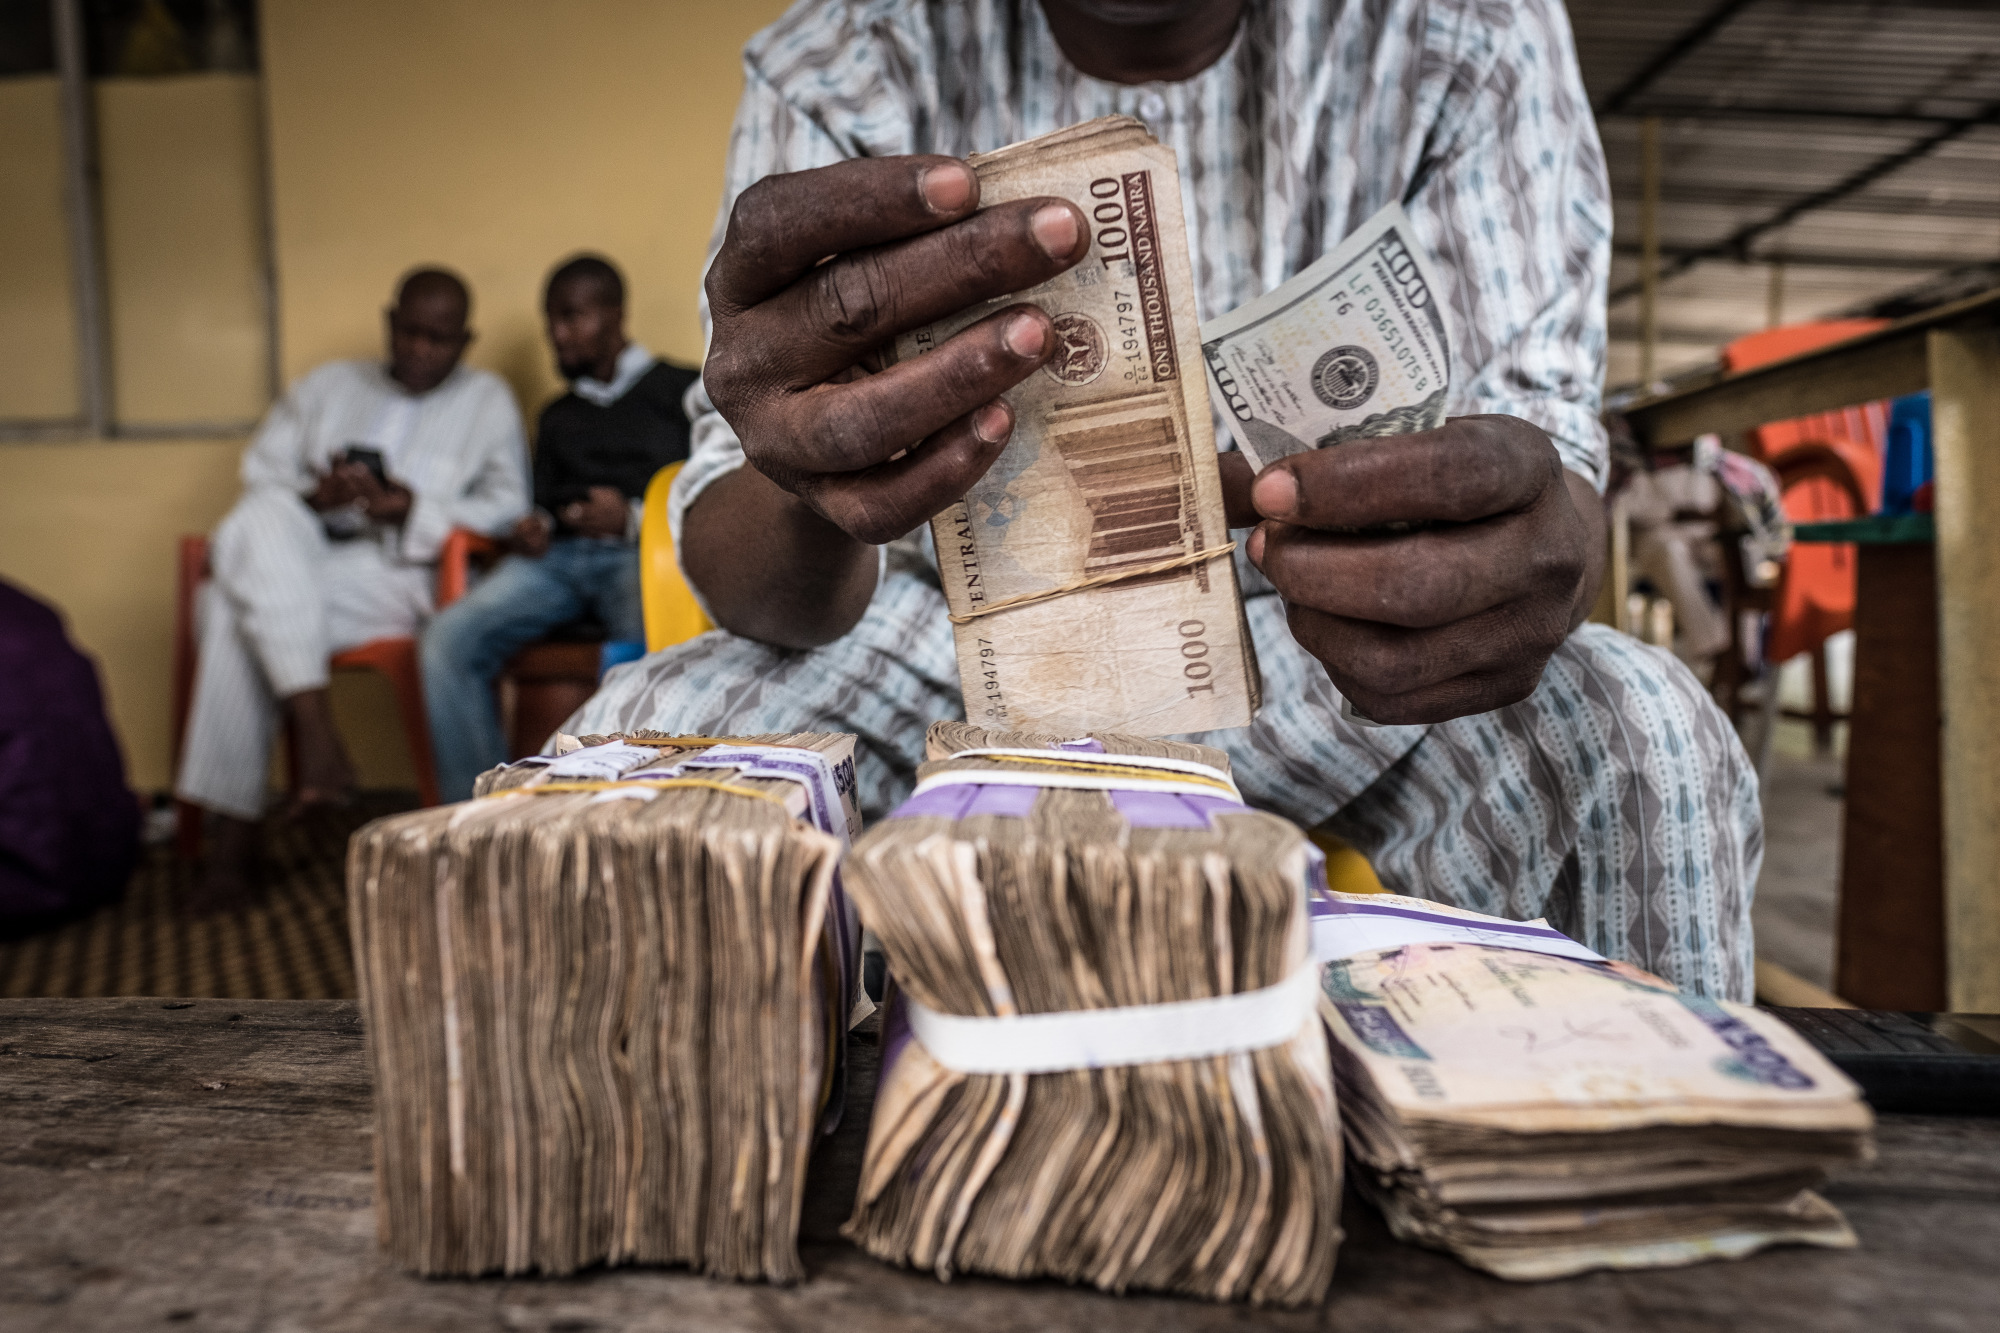 A currency dealer counts bundles of naira banknotes.